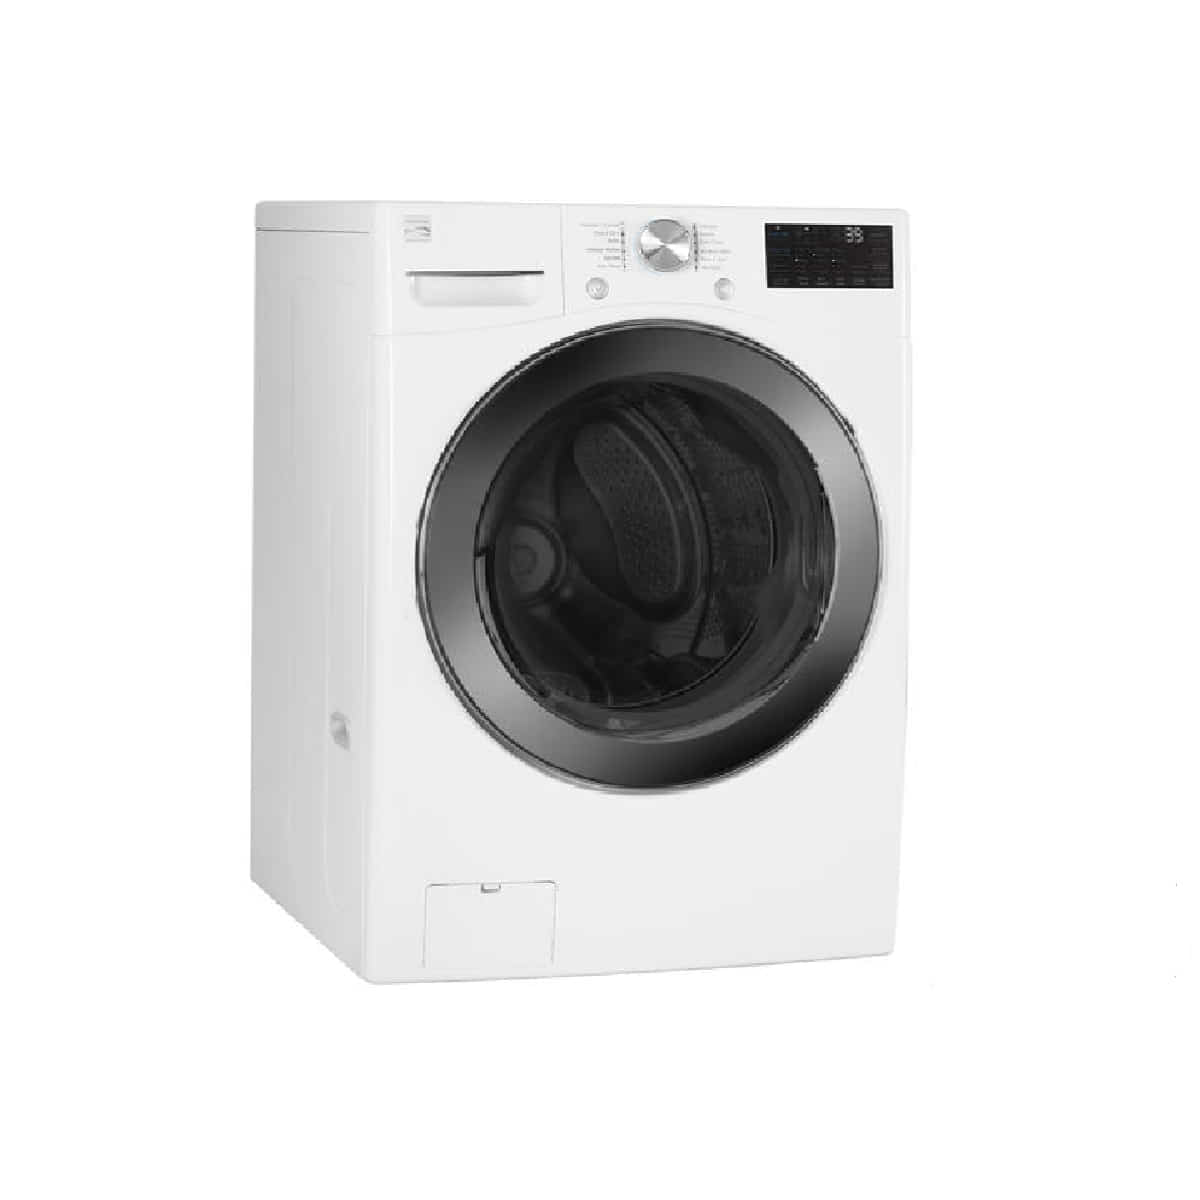 Kenmore front load washer error codes